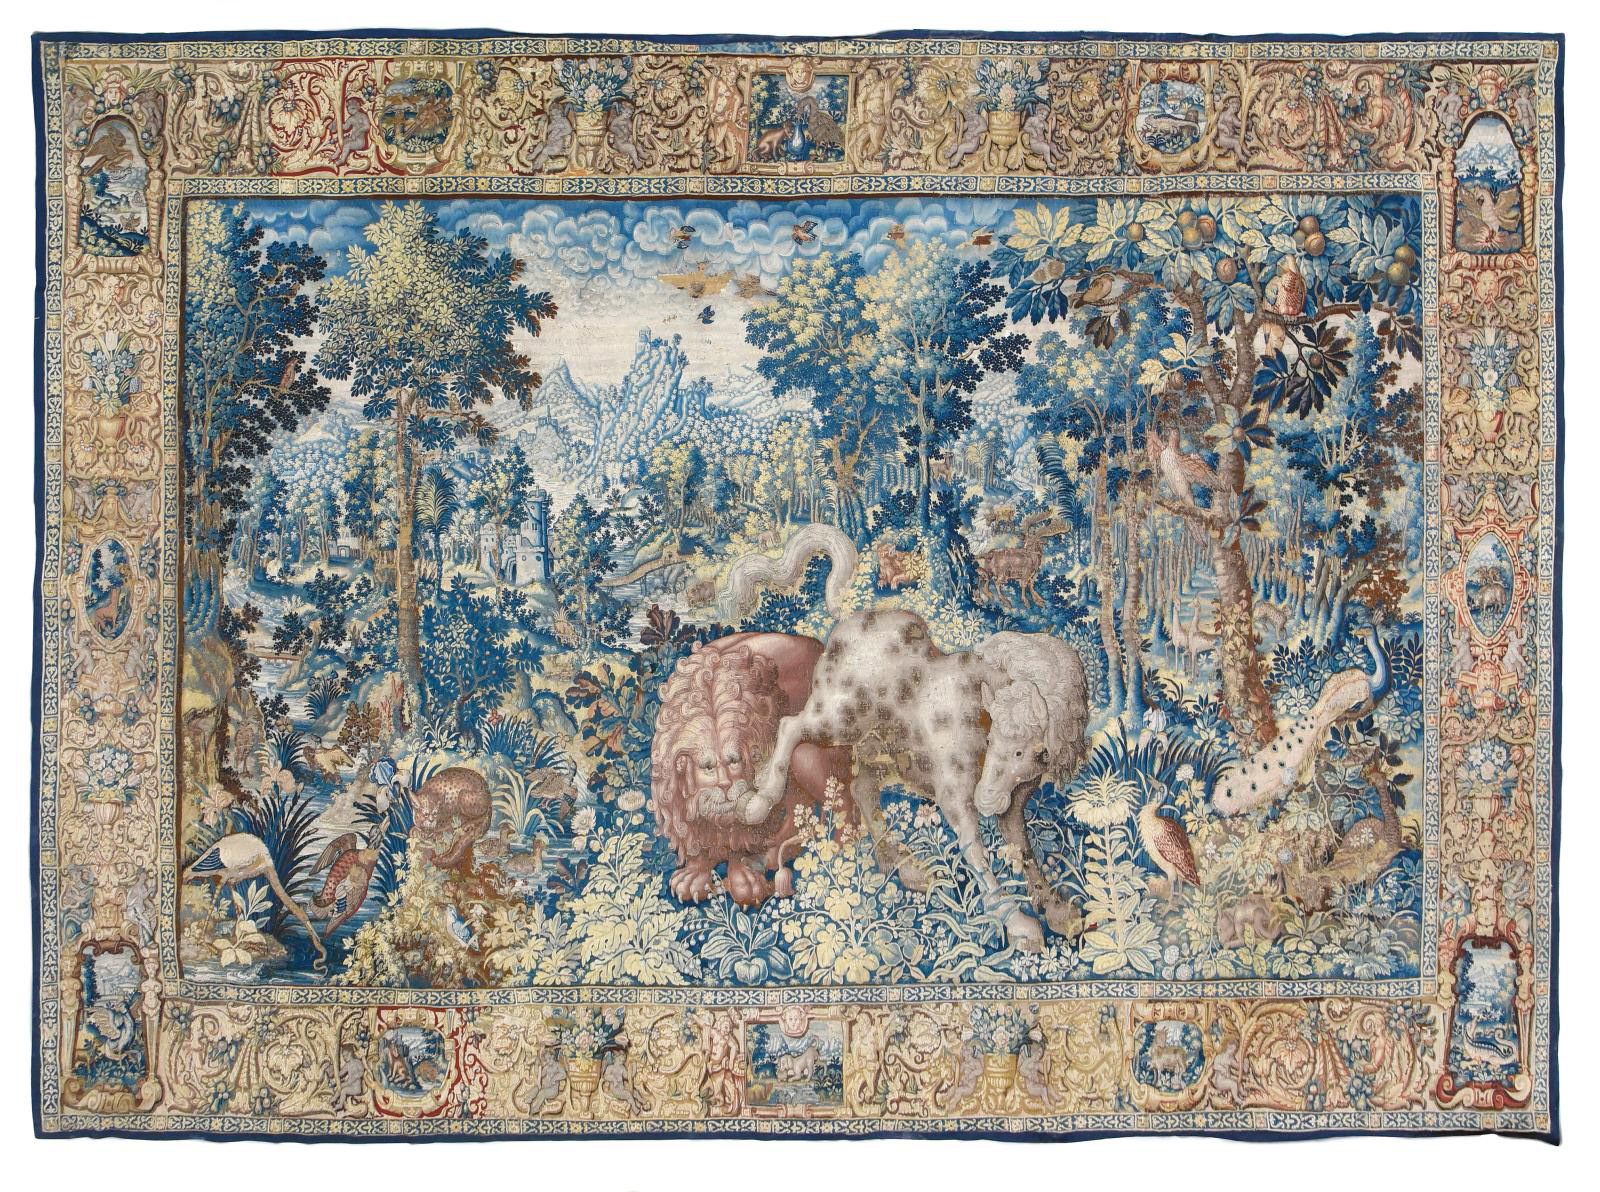 Flanders, c. 1600. Attributed to the workshop of Jan Raes in Enghien, "Pugnae Ferarum" tapestry in silk, wool and silver thread, featuring a fight between a horse and a lion, 342 x 507 cm/11.2 x 16.6 ft. Paris, Tuesday 19 January 2021. Coutau-Bégarie auction house. Mr. Kassapian. Result: €90,160